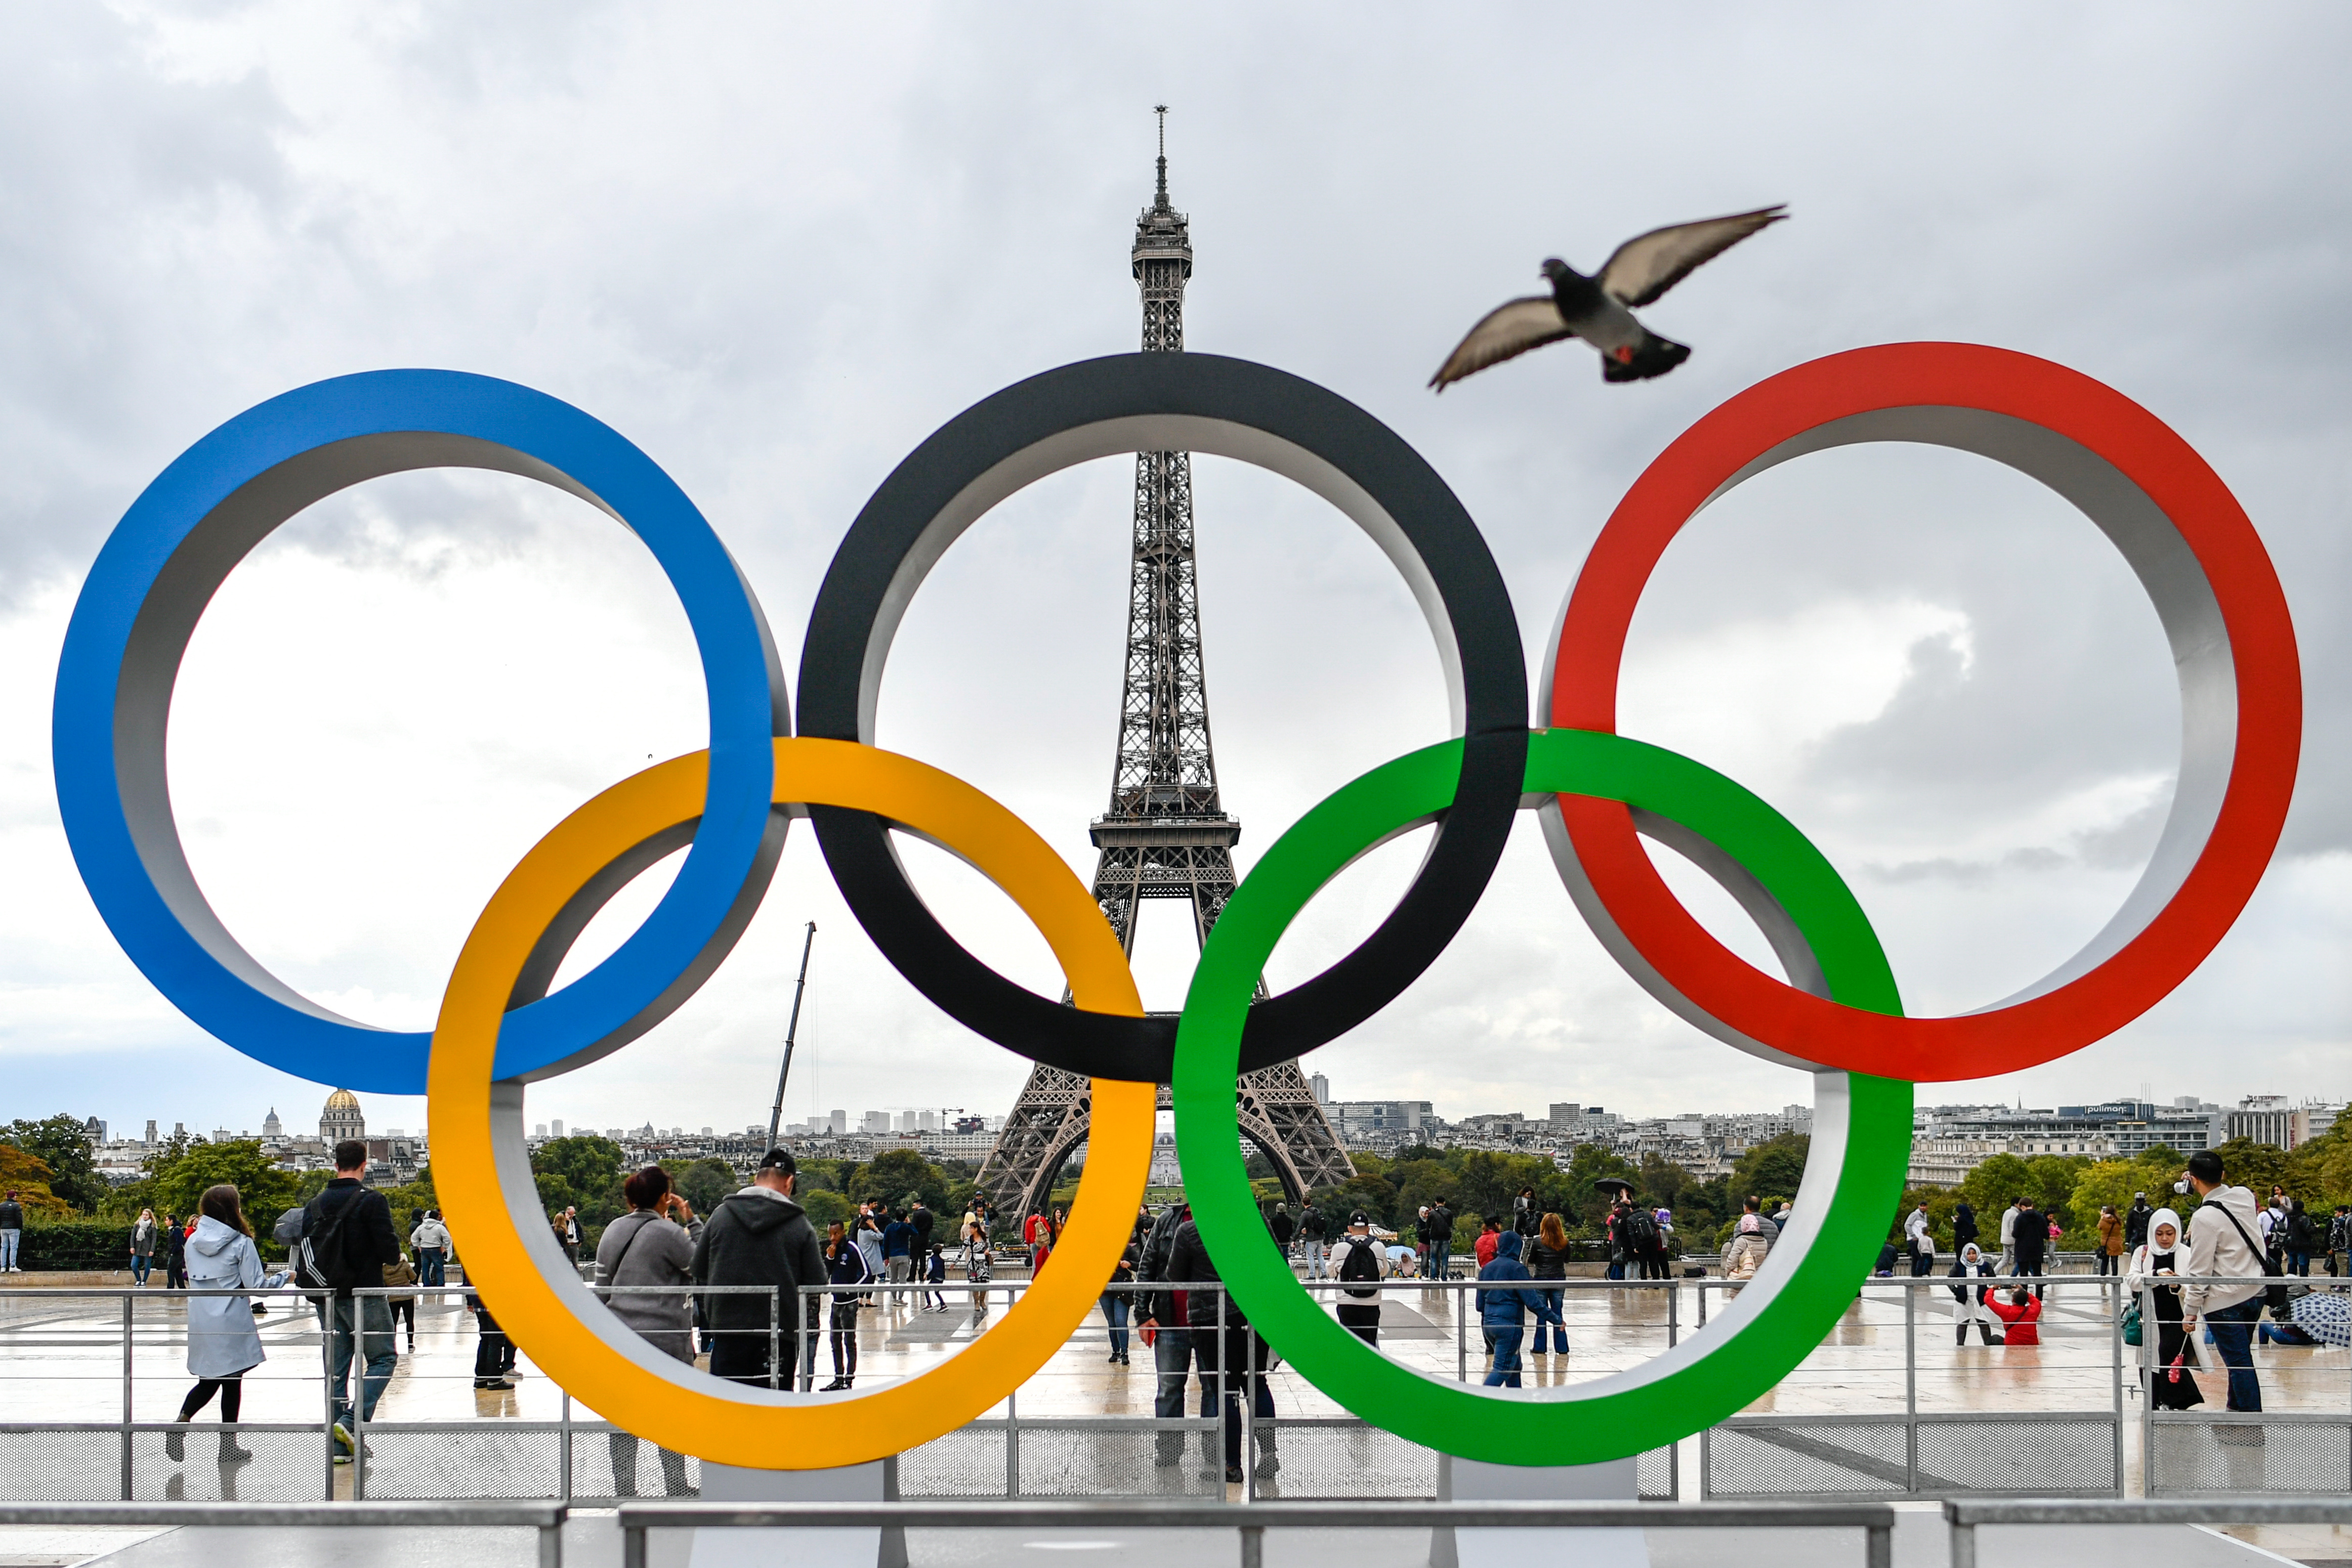 Paris to host 2024 Olympics ESPN's week in pictures Federer and